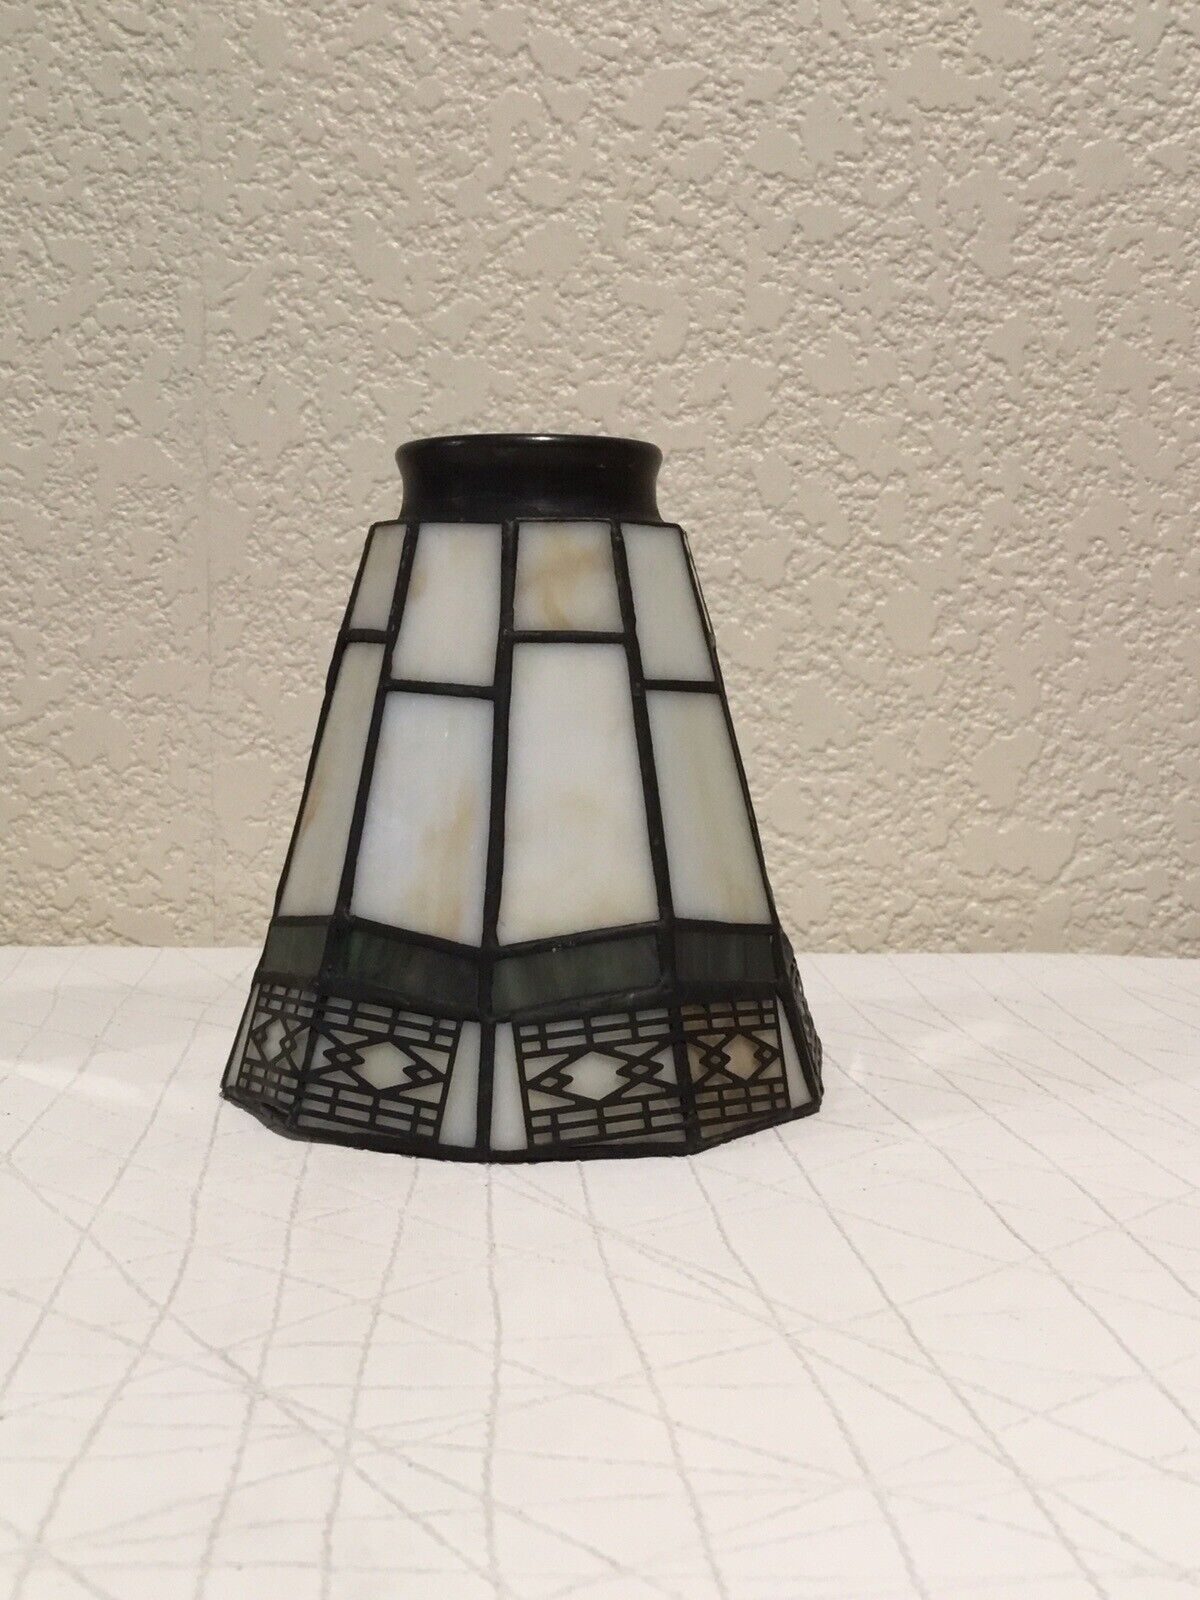 Vintage Spectrum Stained glass Pendant lamp shade - mission style